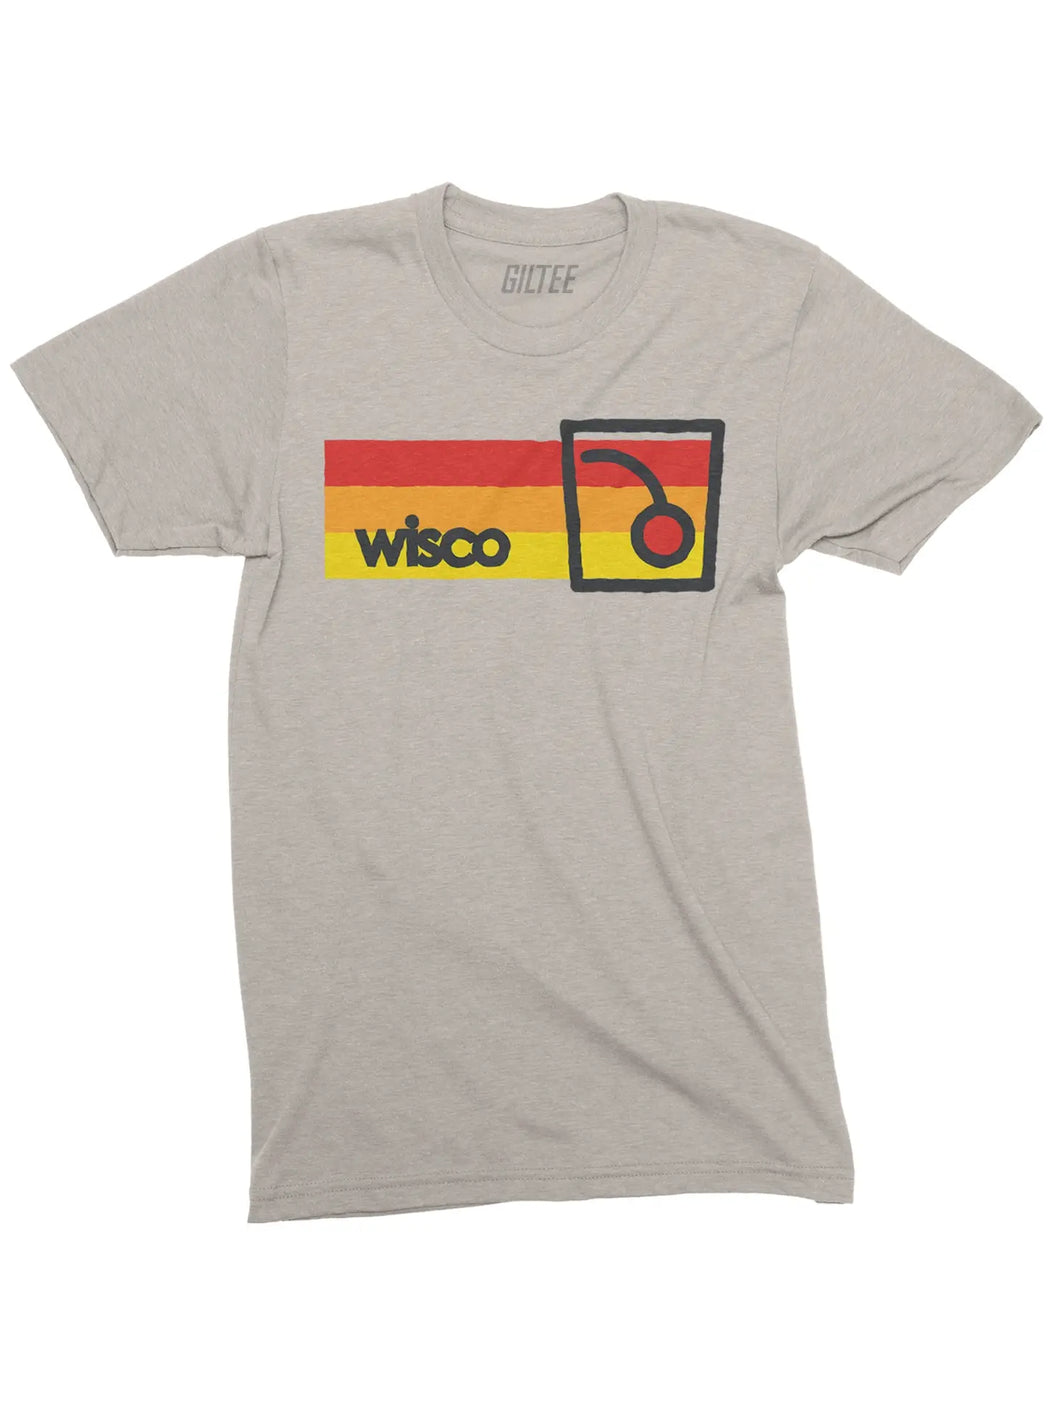 Wisco Old Fashioned Short Sleeve Tee - Sand